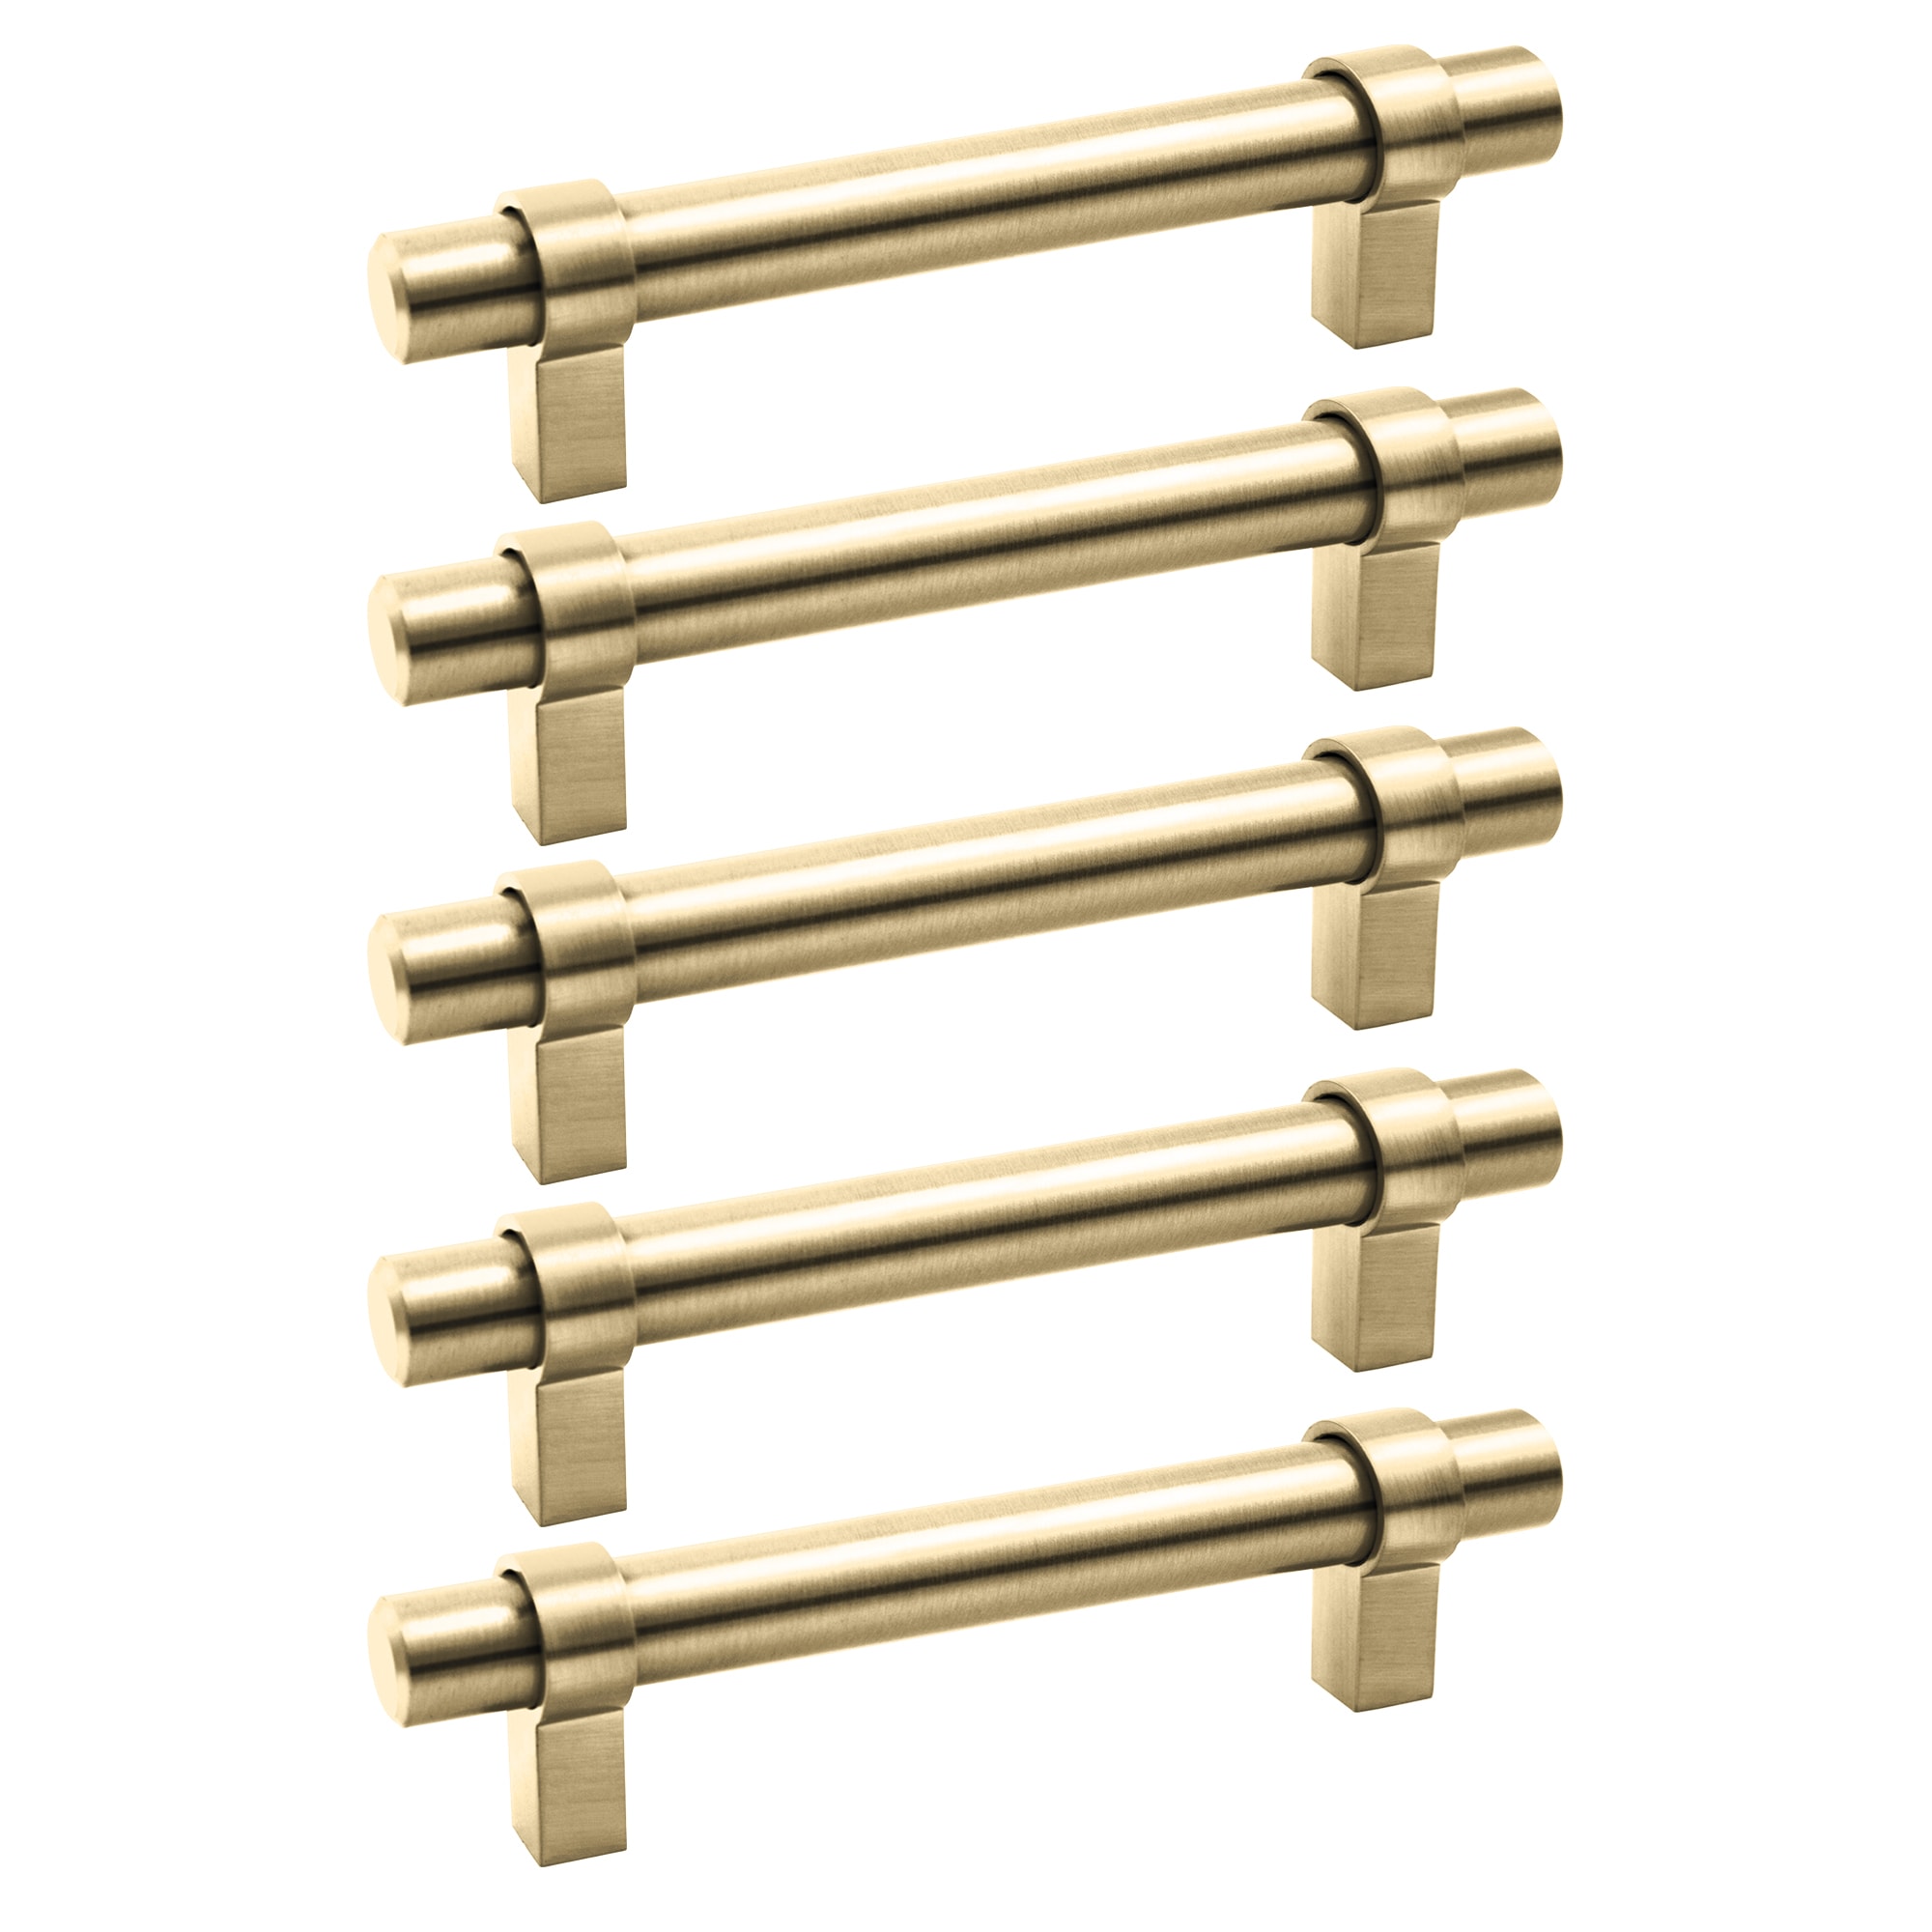 Brass Offset H Hinges for Cupboard Doors - Paxton Hardware